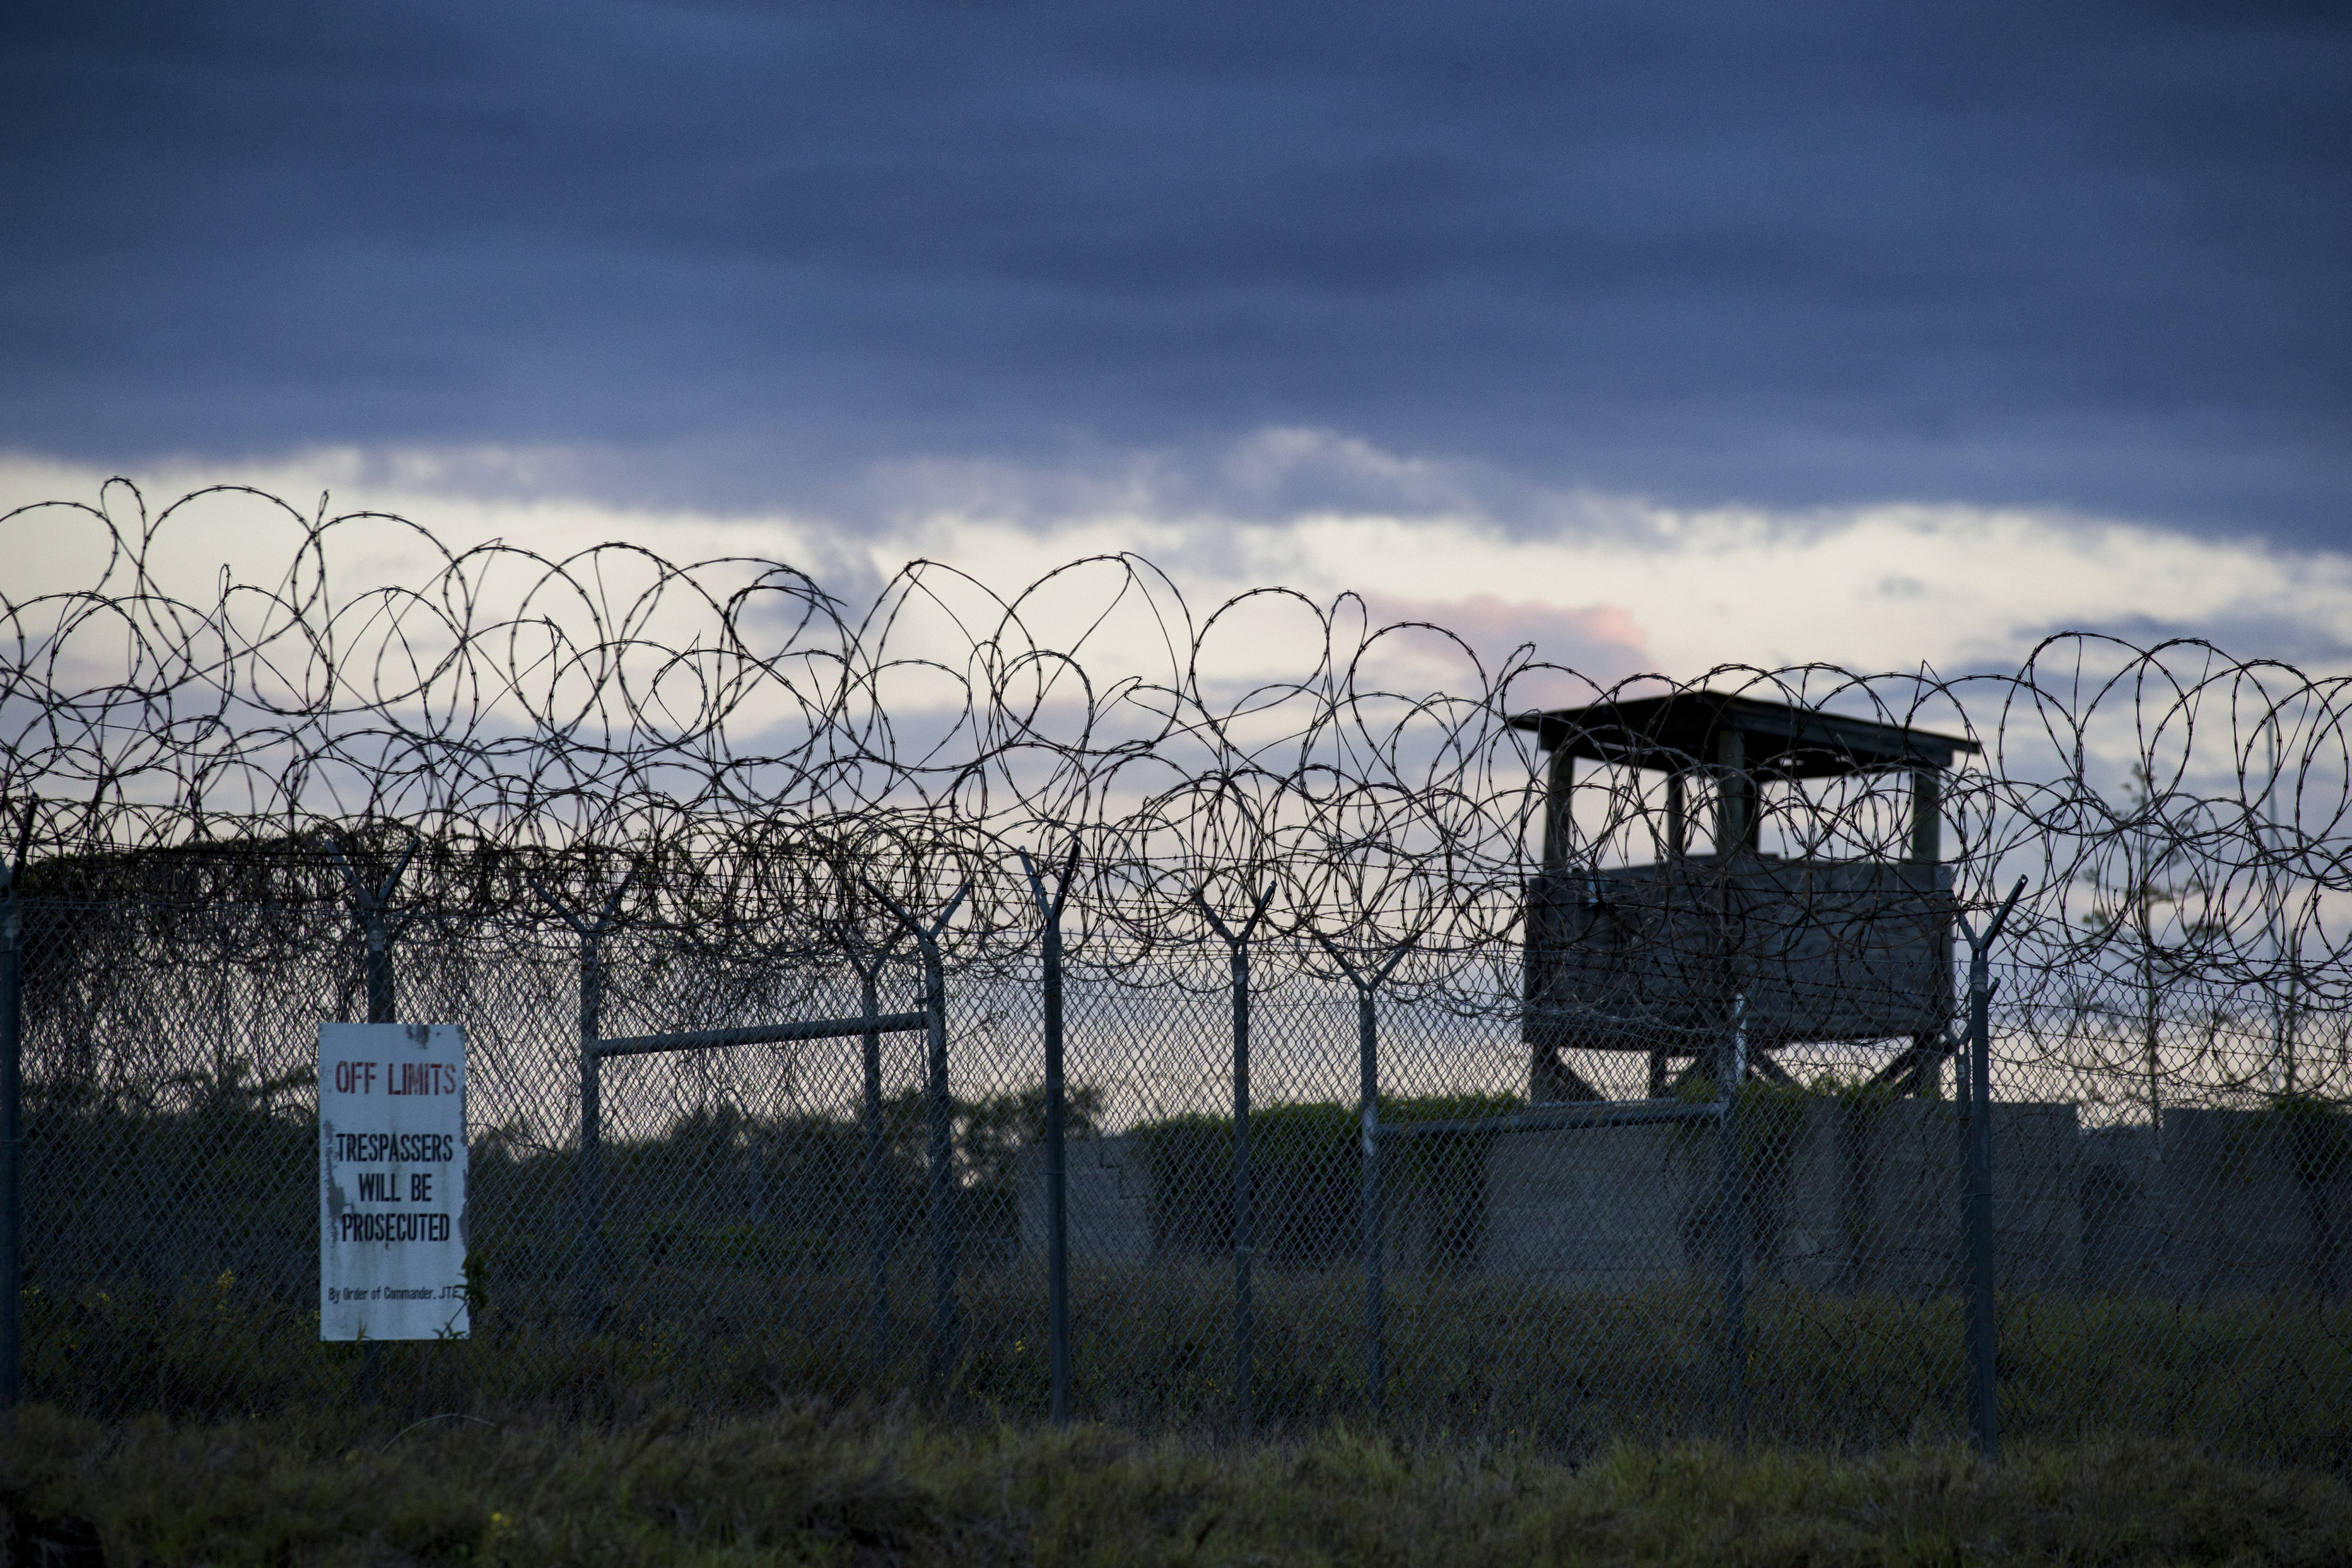 A man was sent home after 20 years of being held at the Guantanamo Bay Naval Base, Cuba. Photo: AP